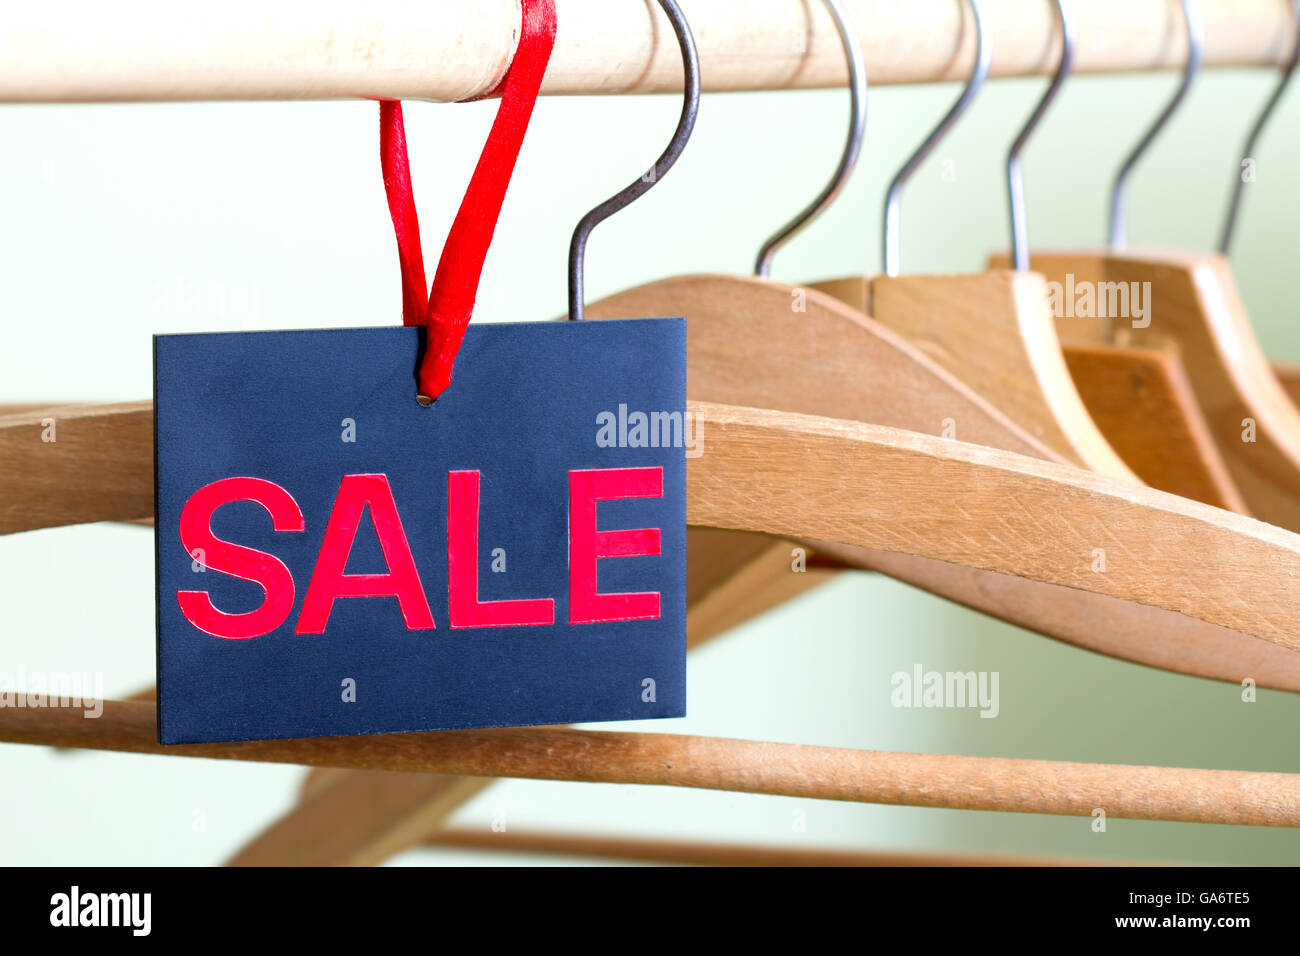 Sale of clothing concept with empty hangers Stock Photo